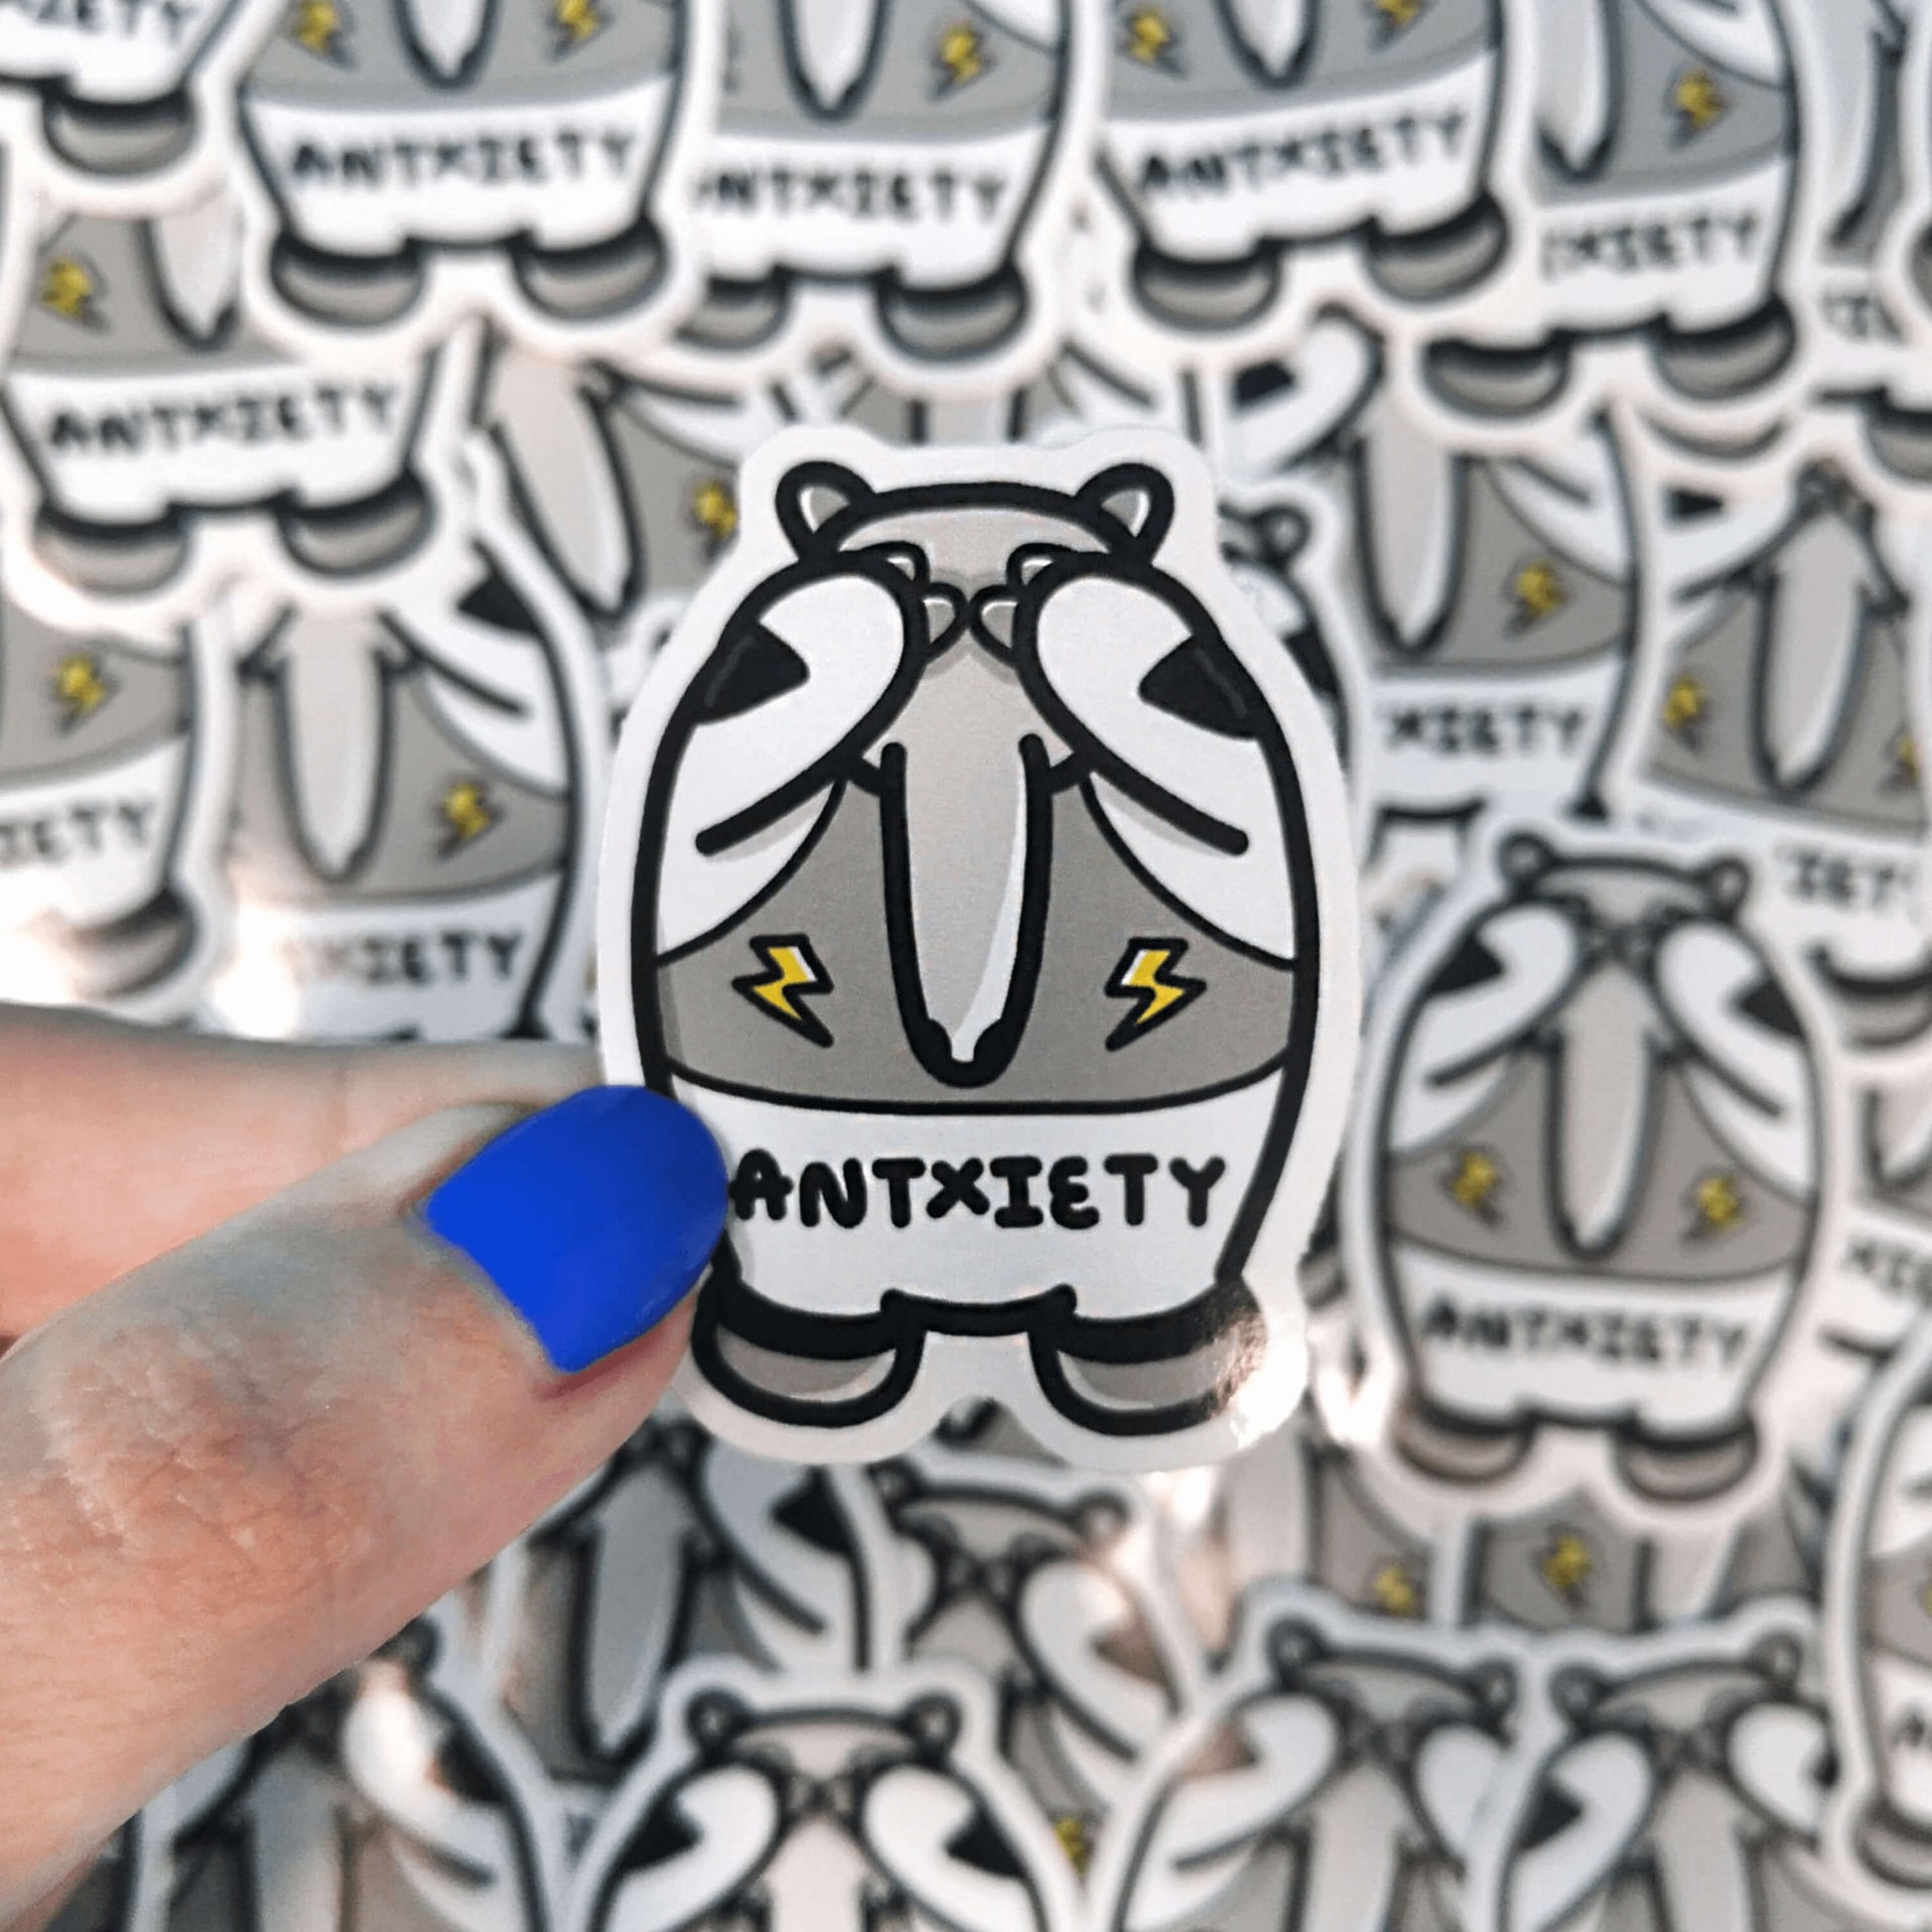 Antxiety Sticker Anxiety being held over lots of the stickers. The sticker is a grey and white anteater with yellow lightning bolts and the word antxiety across its belly. The sticker is designed to raise awareness for anxiety disorders and anxious emotions.